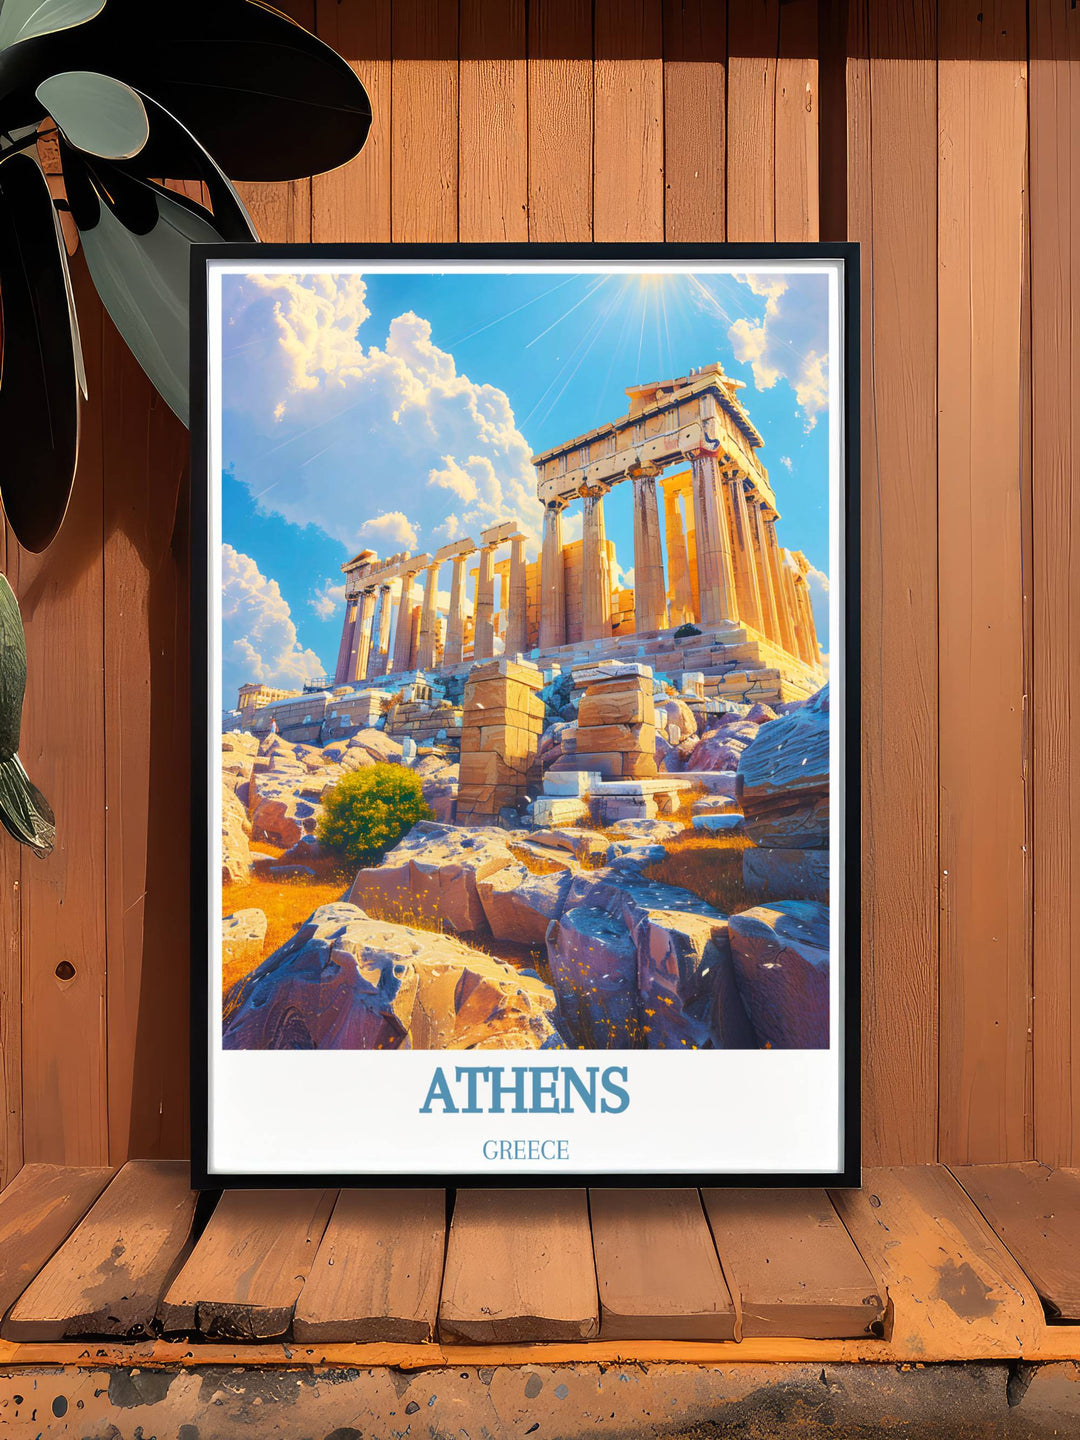 Acropolis wall art depicting the detailed carvings of the Parthenon, set against a backdrop of blue skies and Athenian landscape.